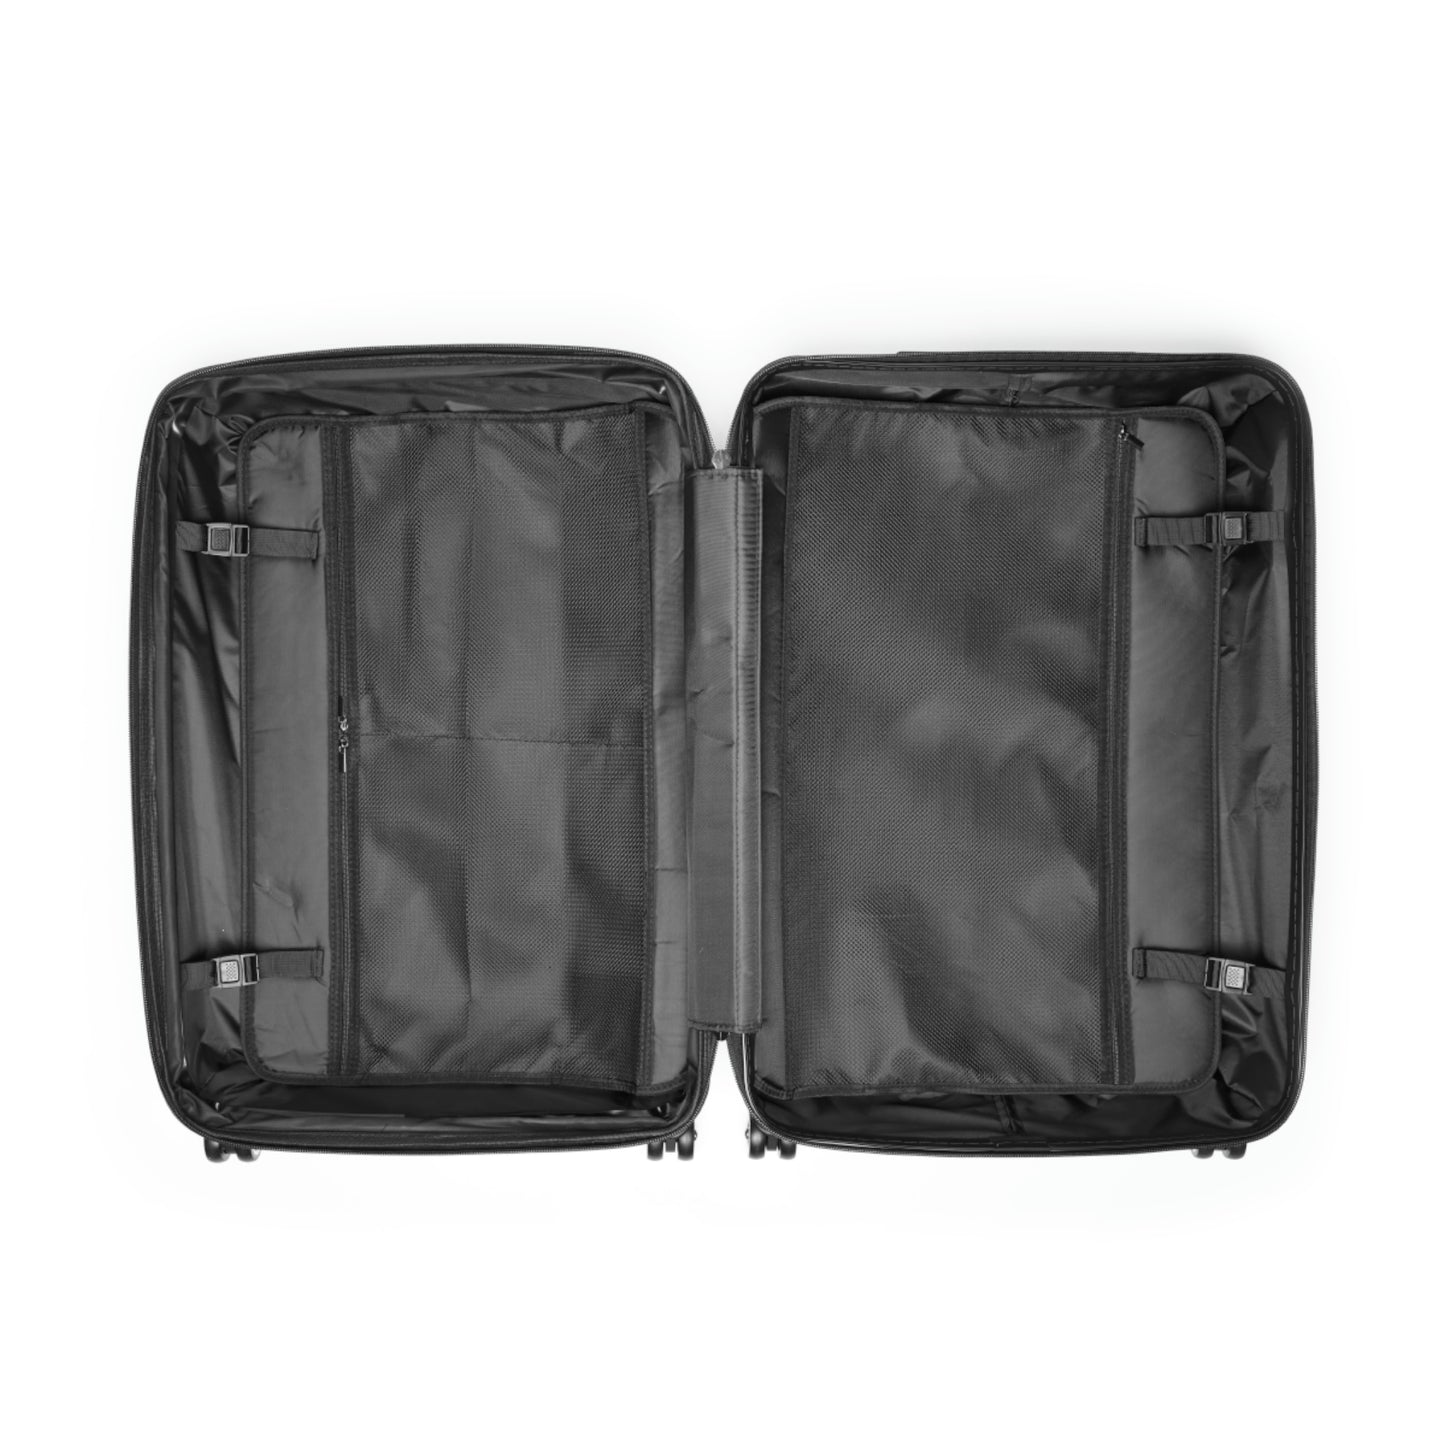 Hard Shell Suitcases - Wild Nature